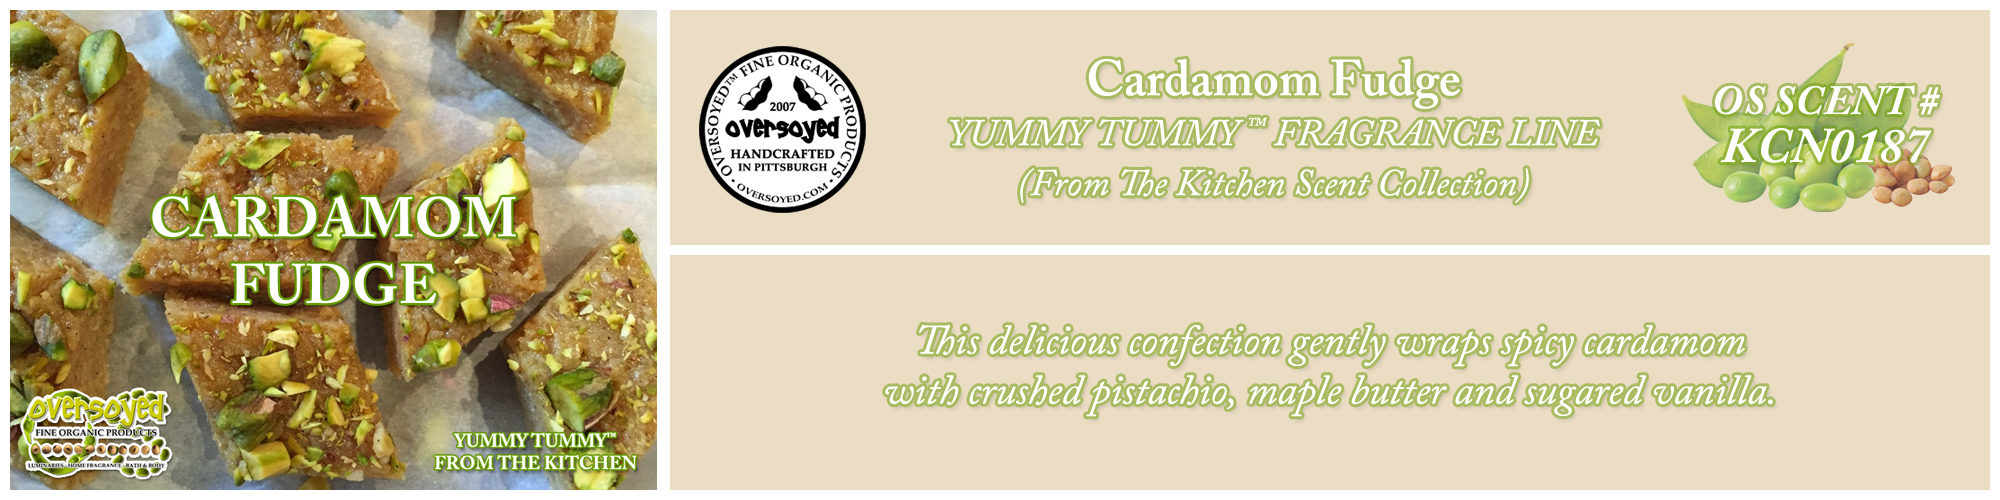 Cardamom Fudge Handcrafted Products Collection